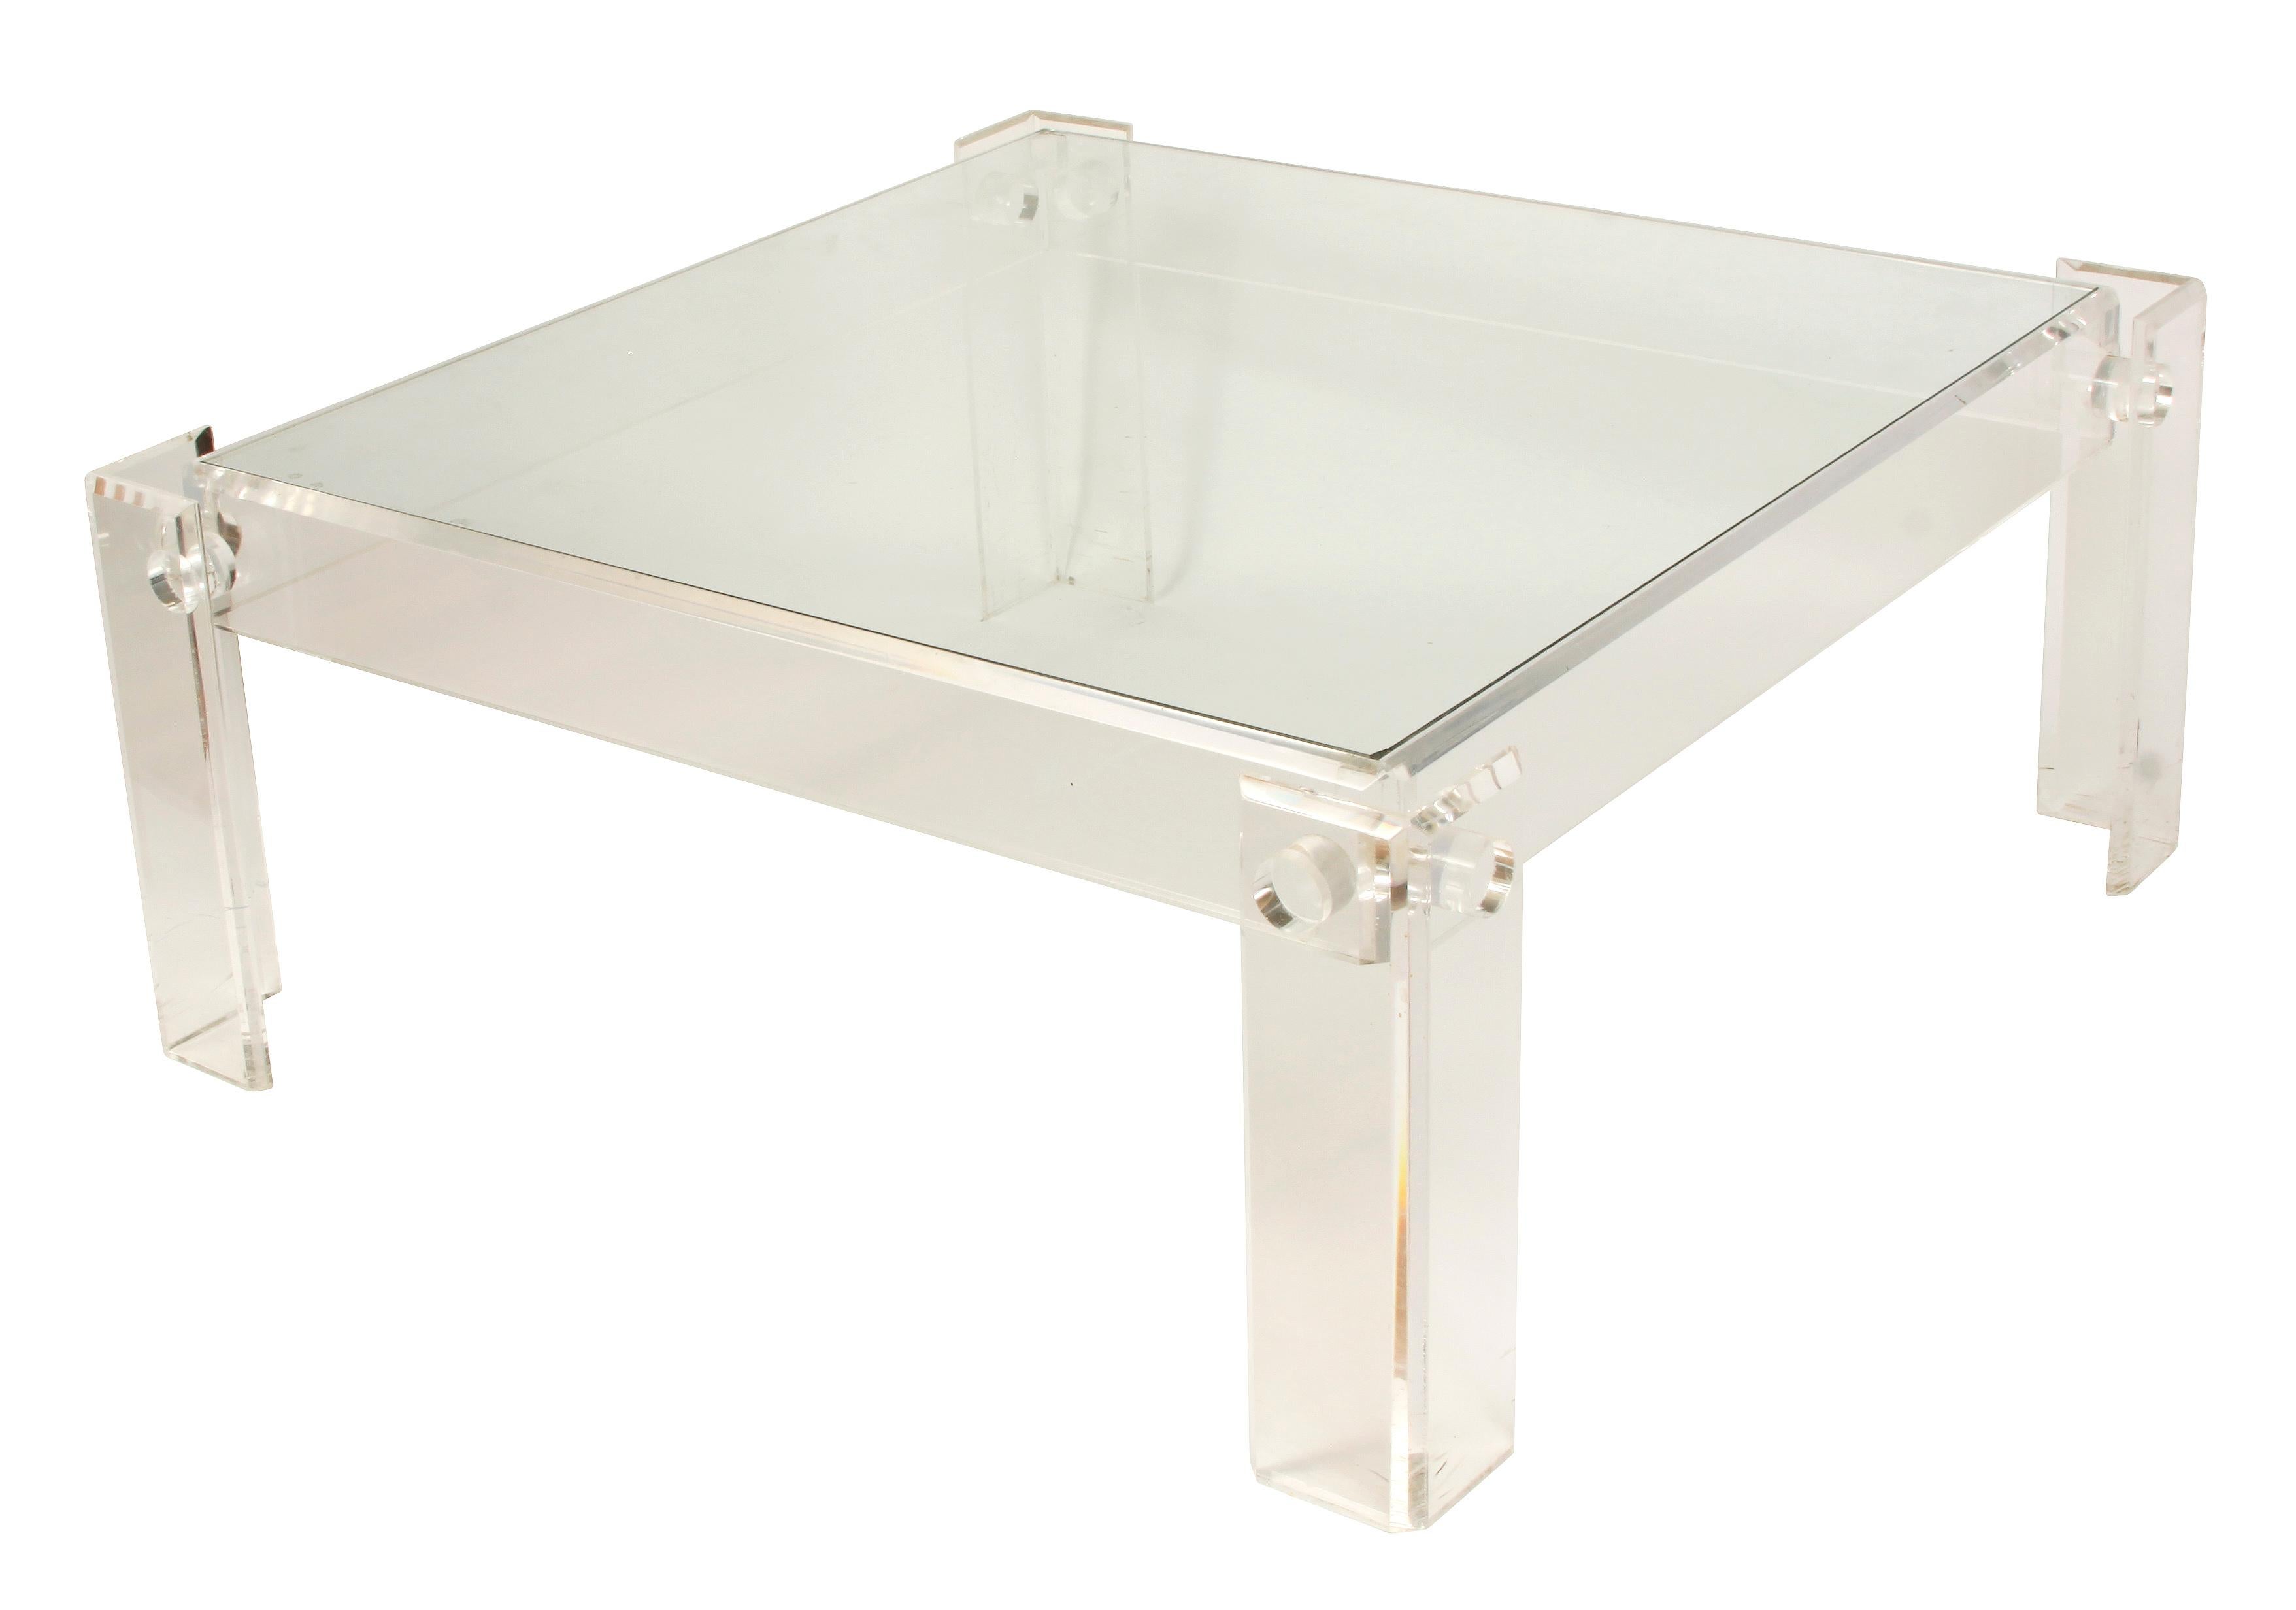 Lucite base and glass top square cocktail table.